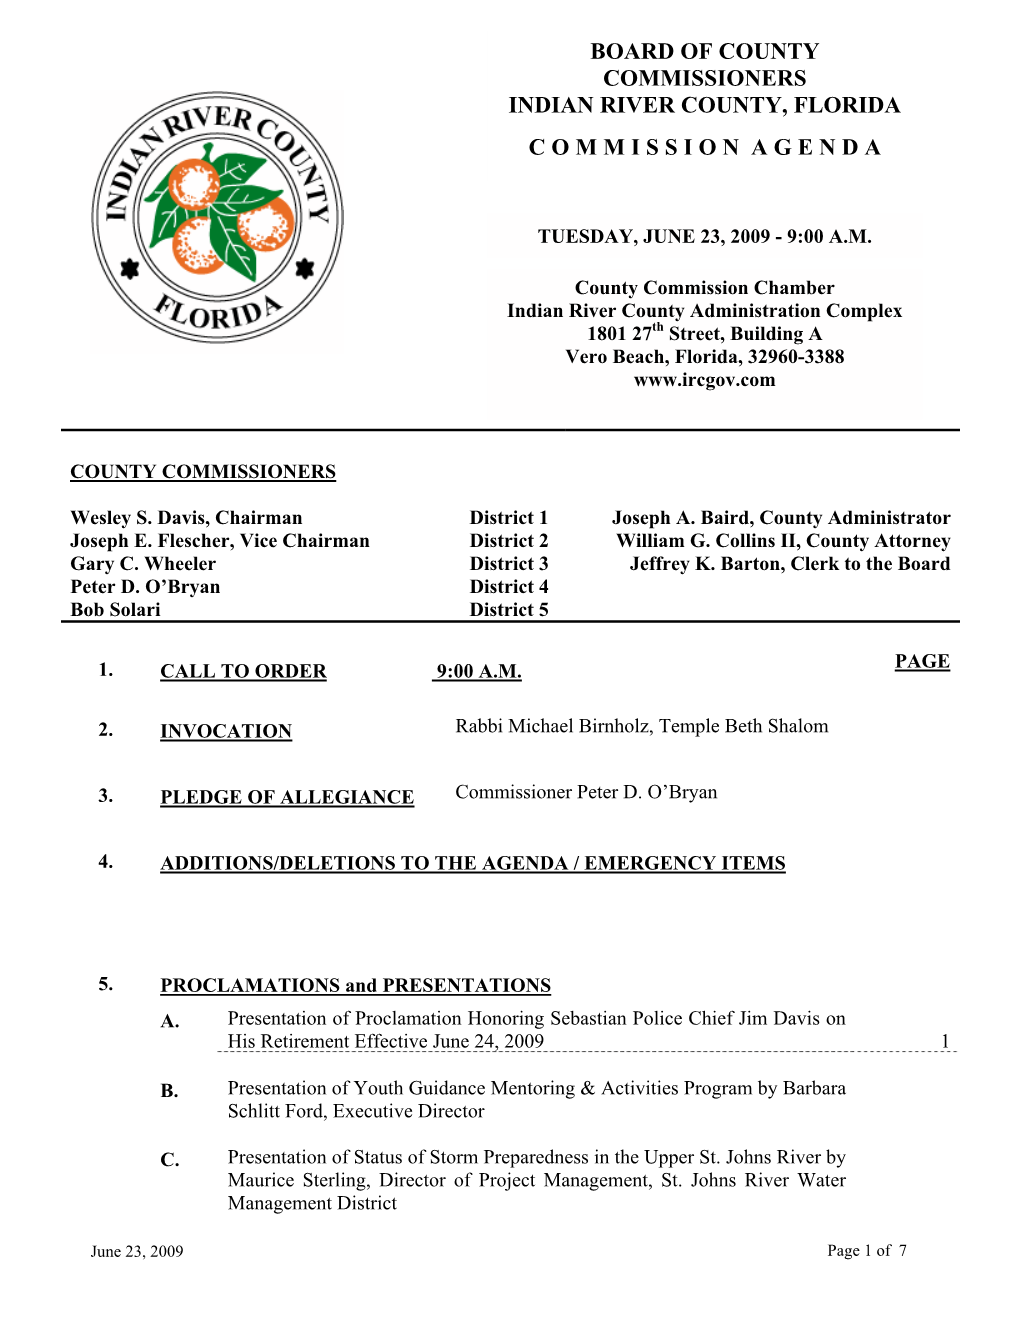 Board of County Commissioners Meeting Agenda 06/23/09